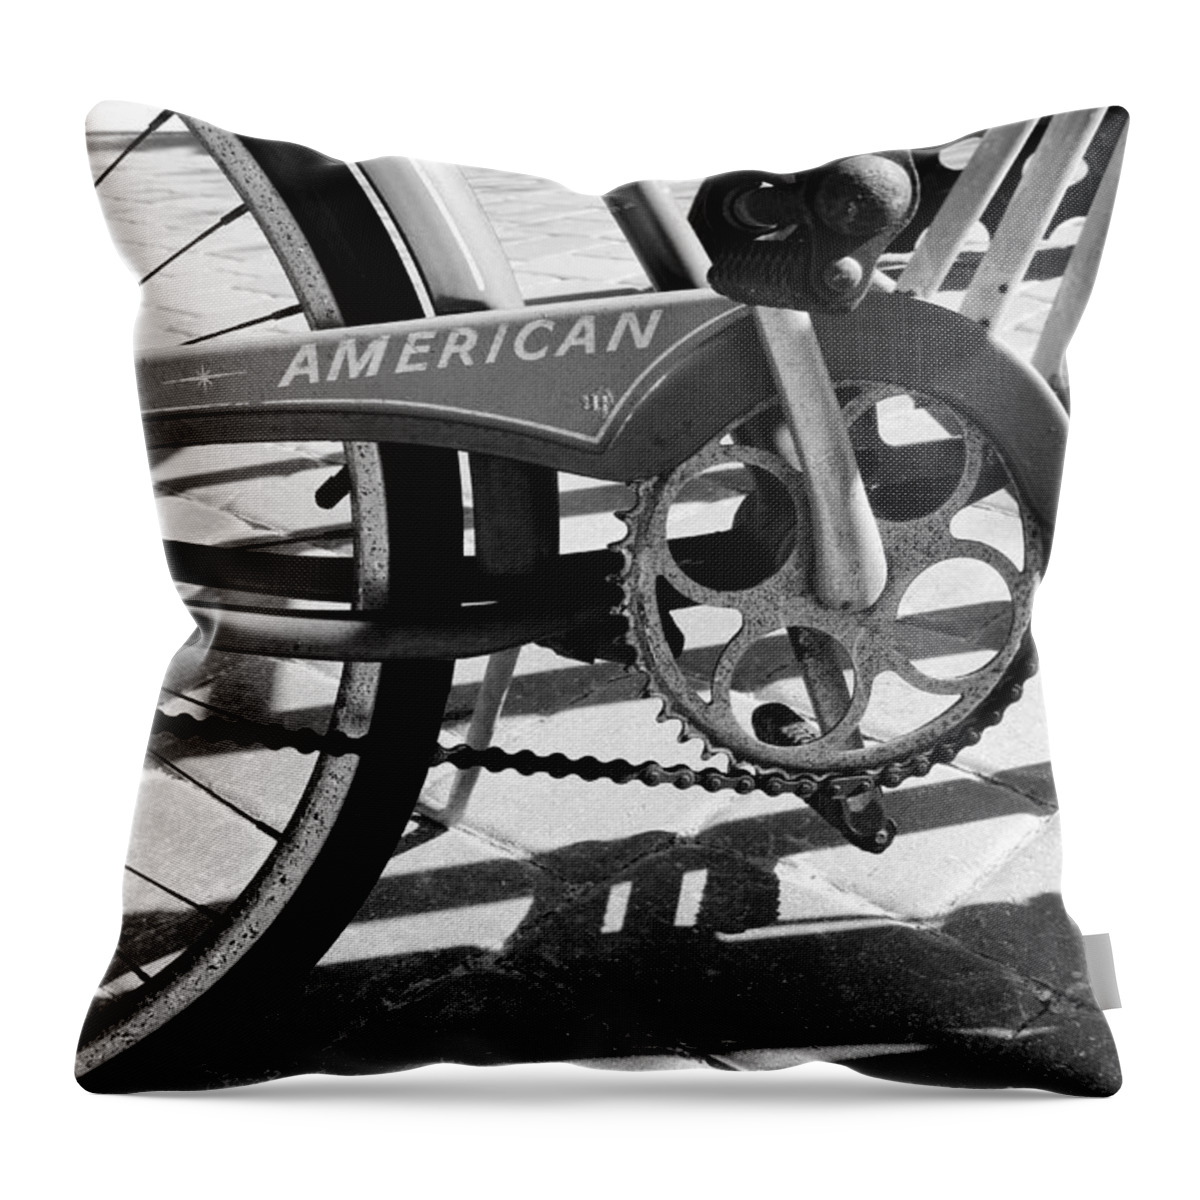 Photo For Sale Throw Pillow featuring the photograph Bike Chain by Robert Wilder Jr